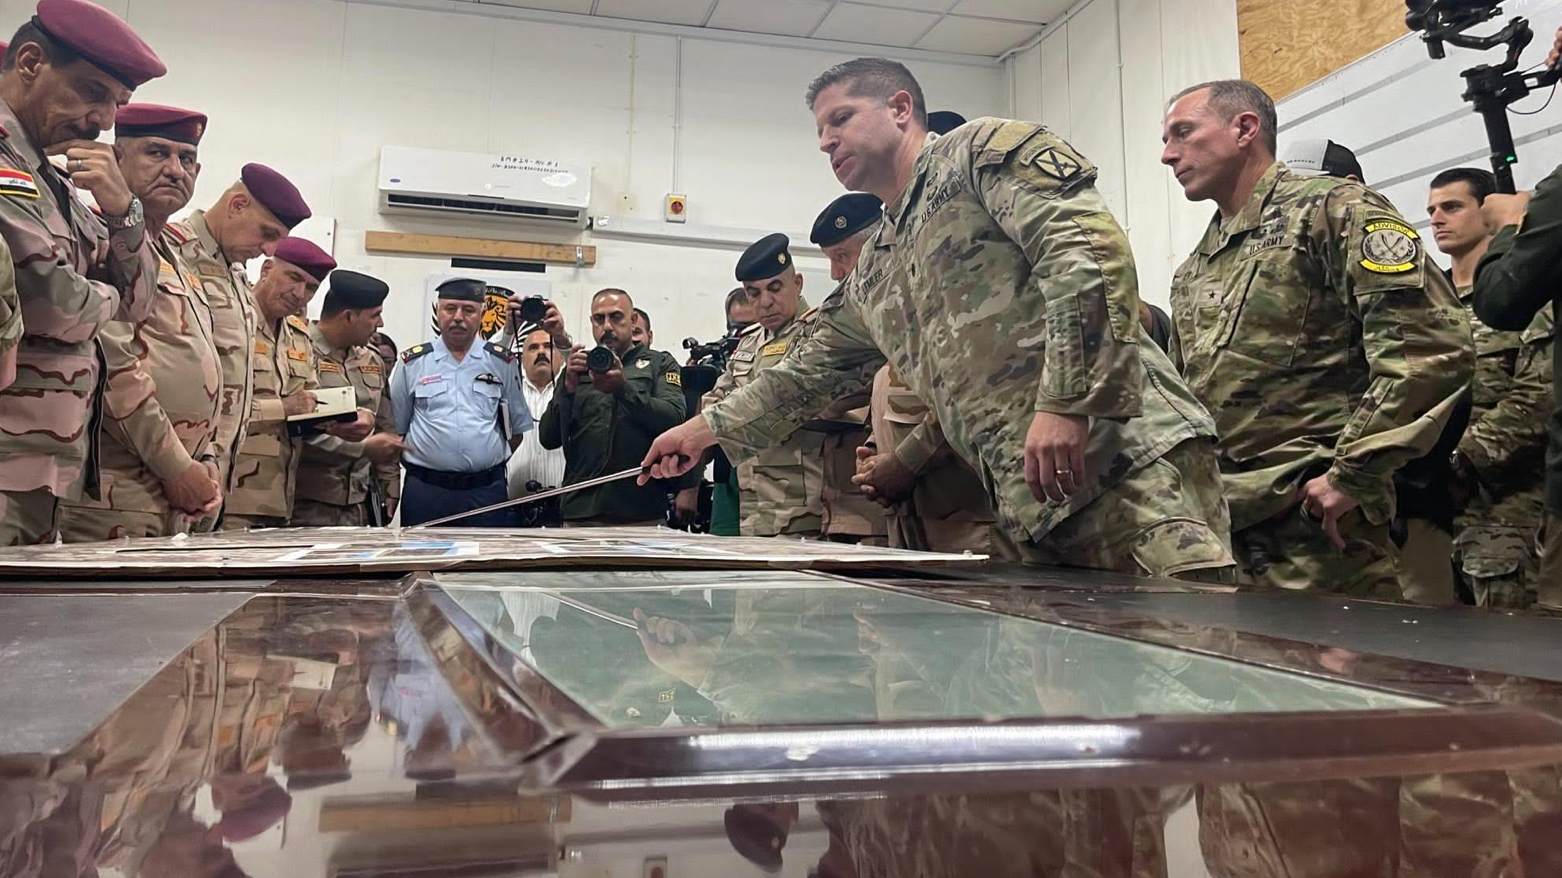 An Iraqi army delegation led by Army Chief of Staff Gen. Abdul Amir Yarallah on Saturday visited the Ain Al Asad Airbase (Photo: CJTFOIR)